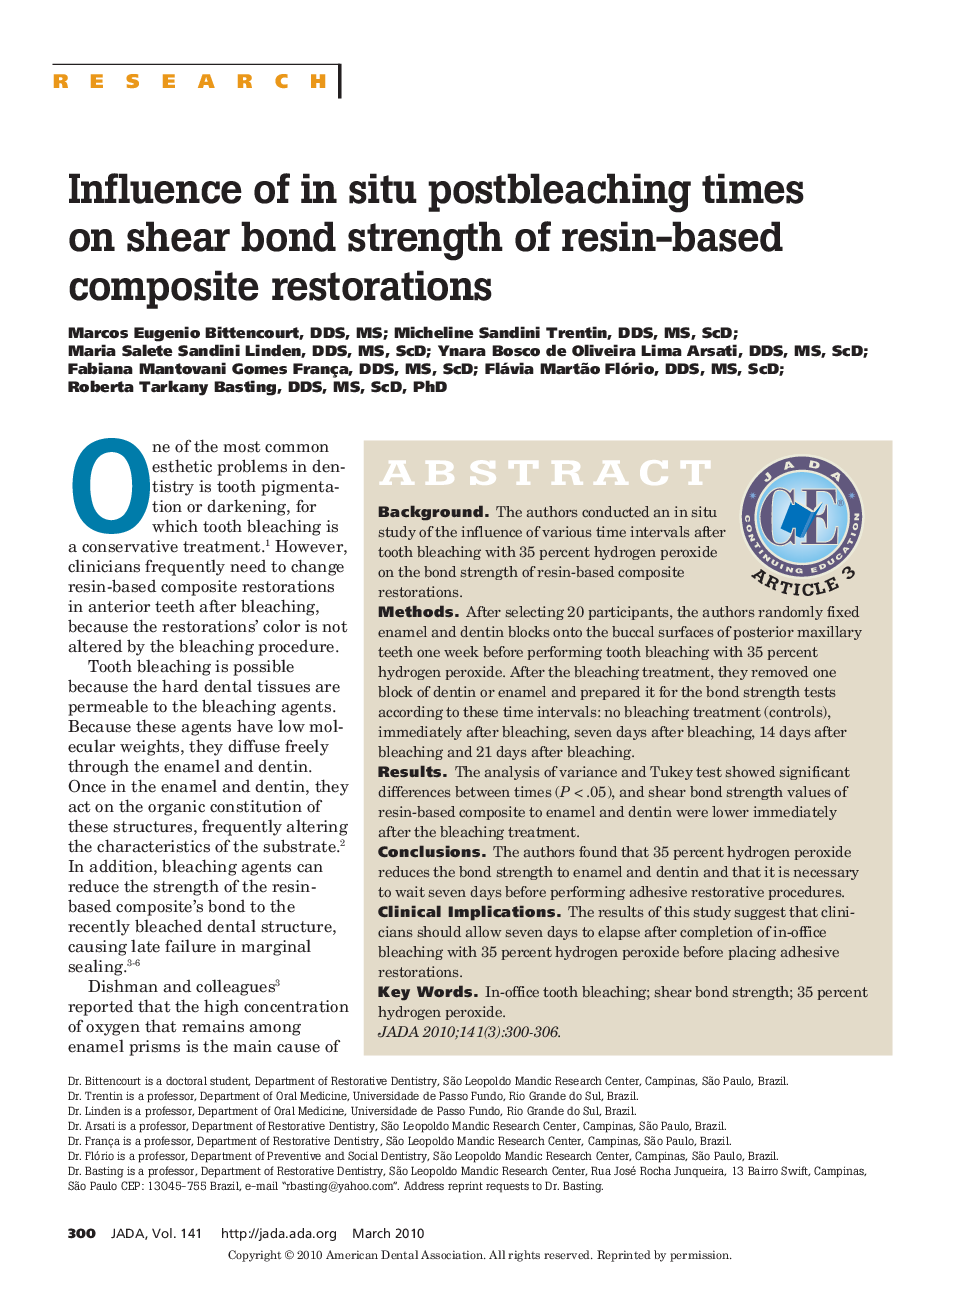 Influence of in Situ Postbleaching Times on Shear Bond Strength of Resin-Based Composite Restorations